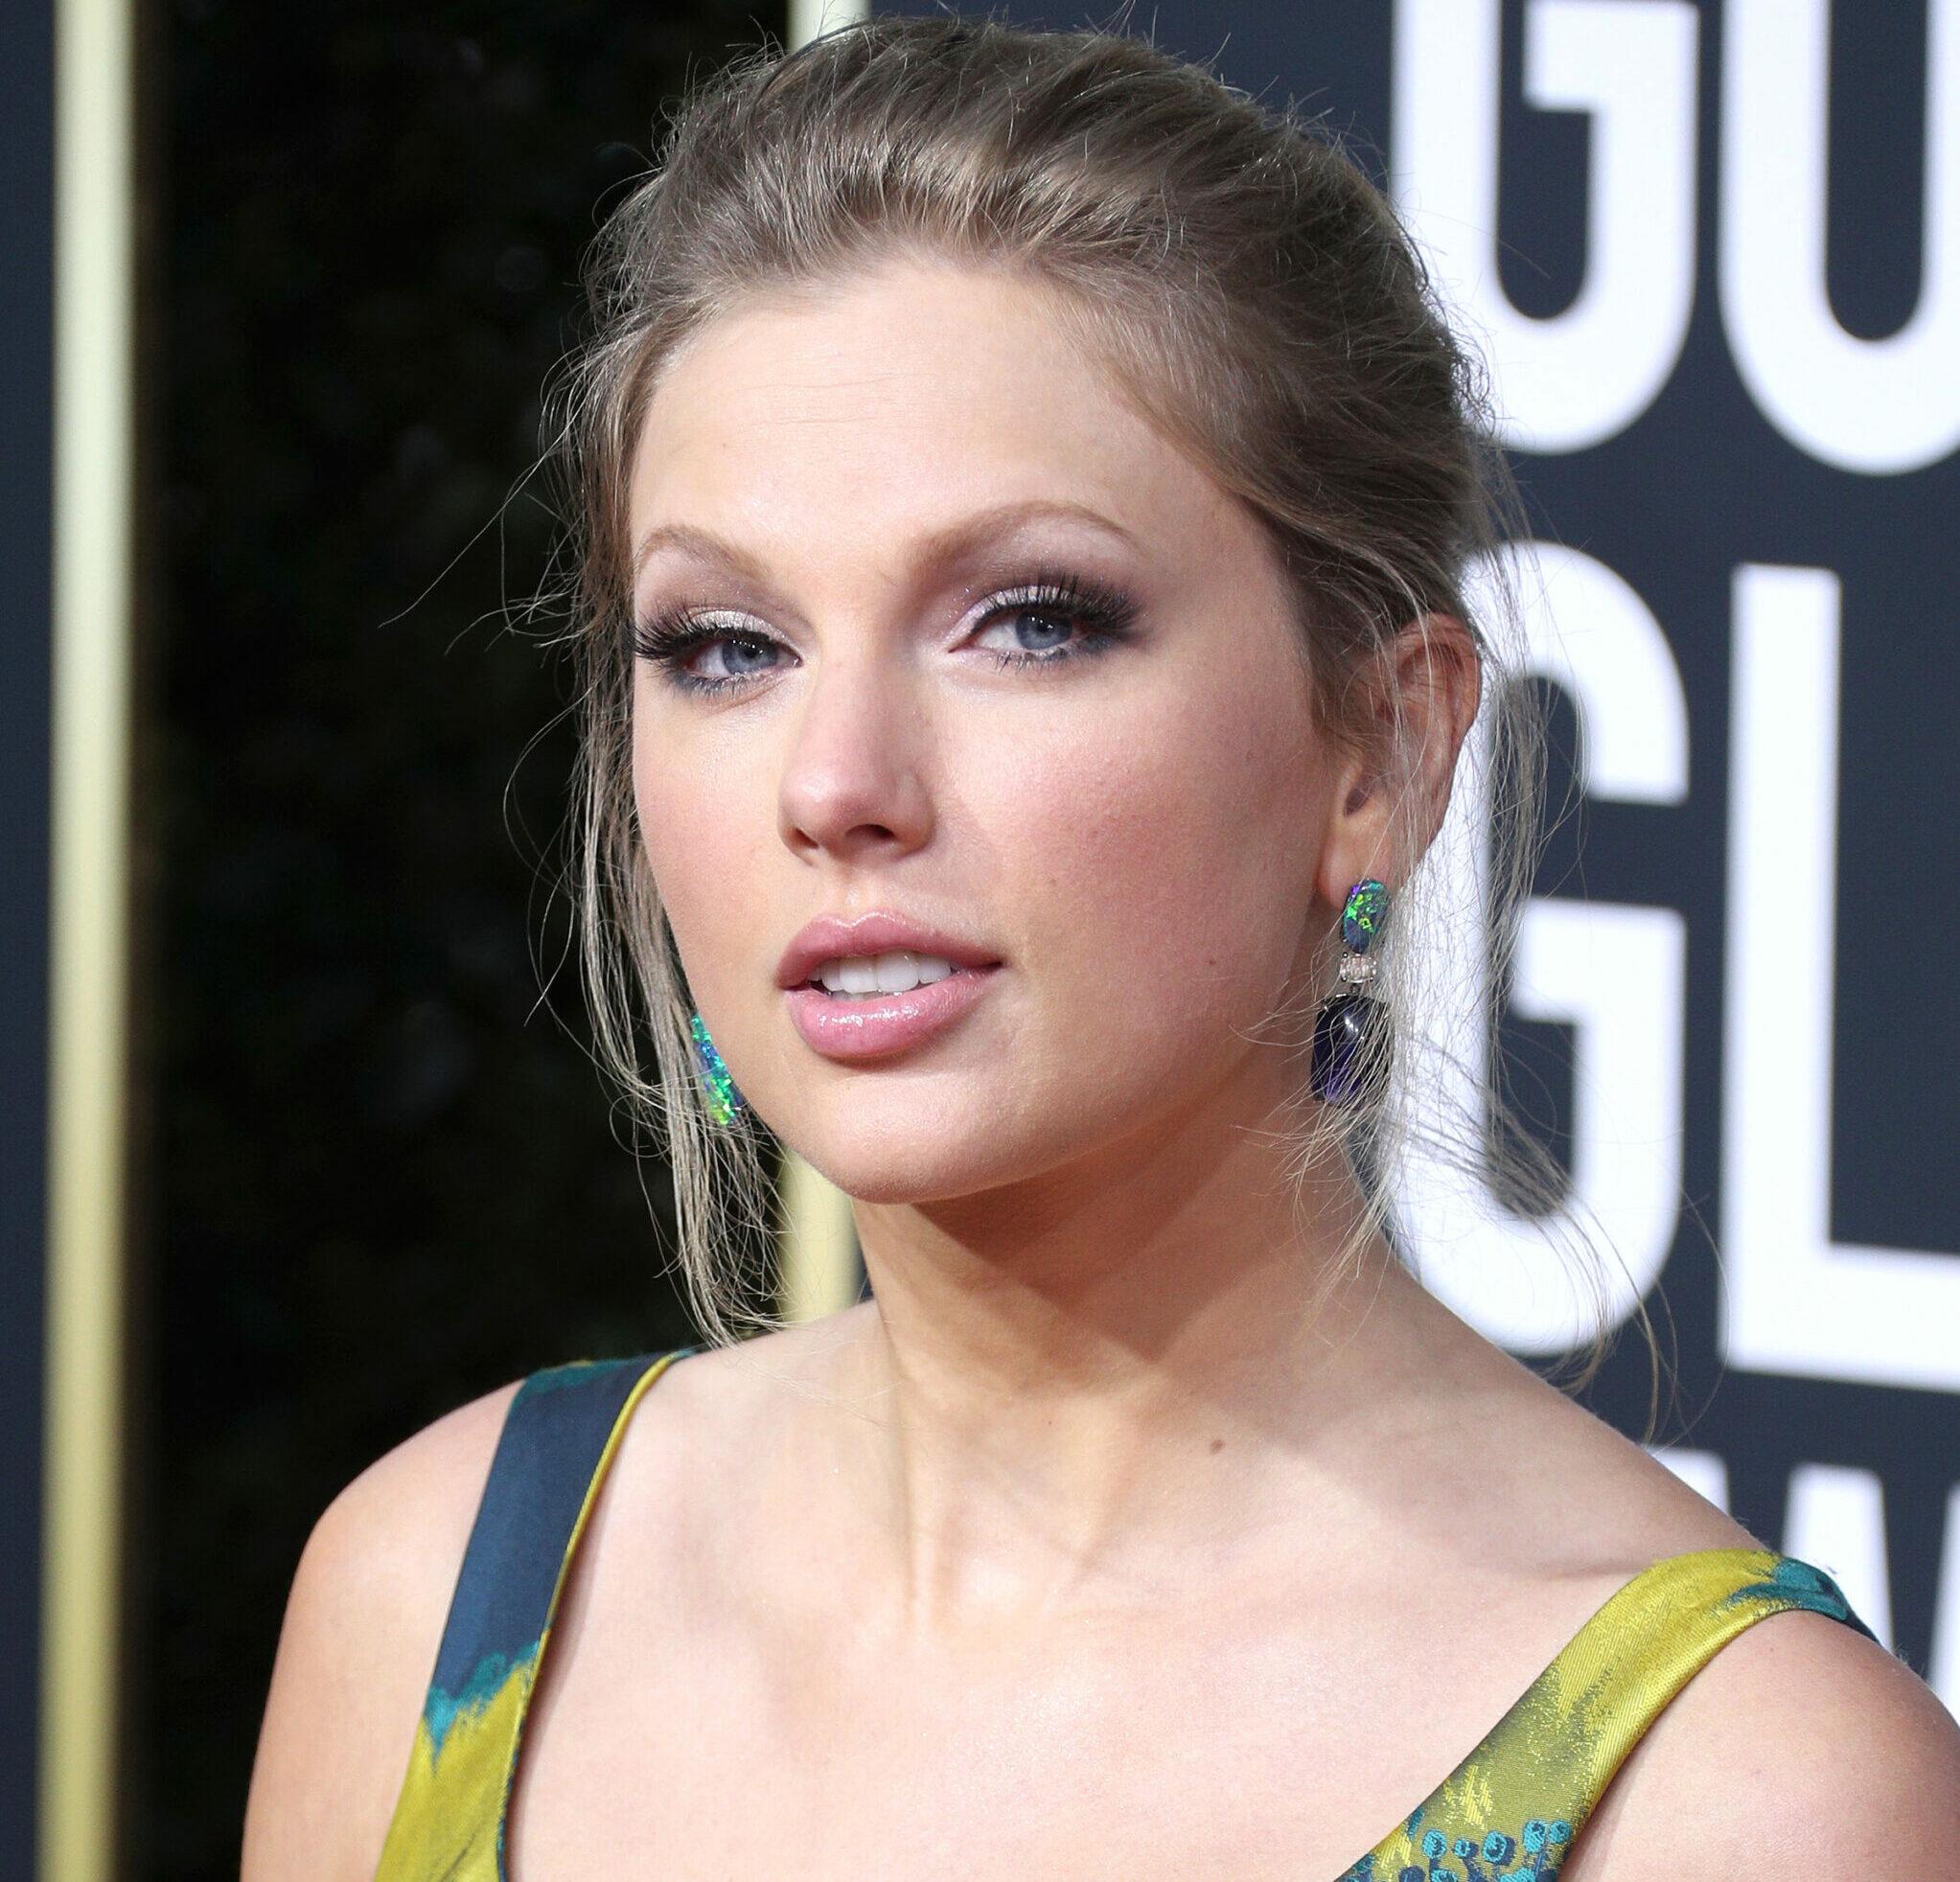 77th Annual Golden Globe Awards - Arrivals. 05 Jan 2020 Pictured: Taylor Swift.